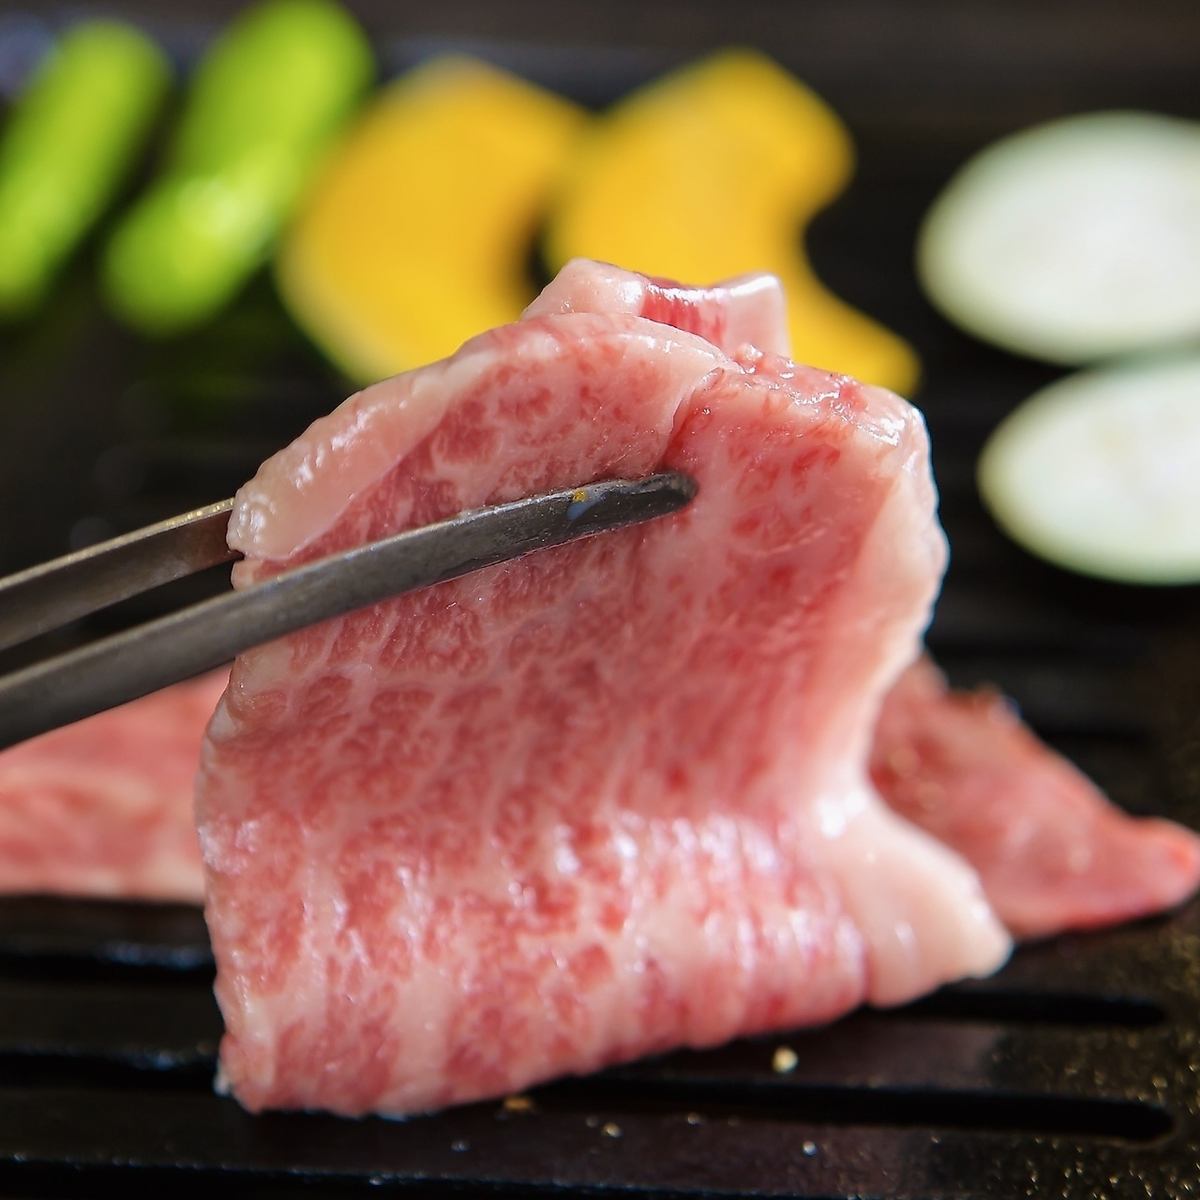 We confidently deliver the highest quality branded beef, including Omi beef and Kuroge Wagyu beef.